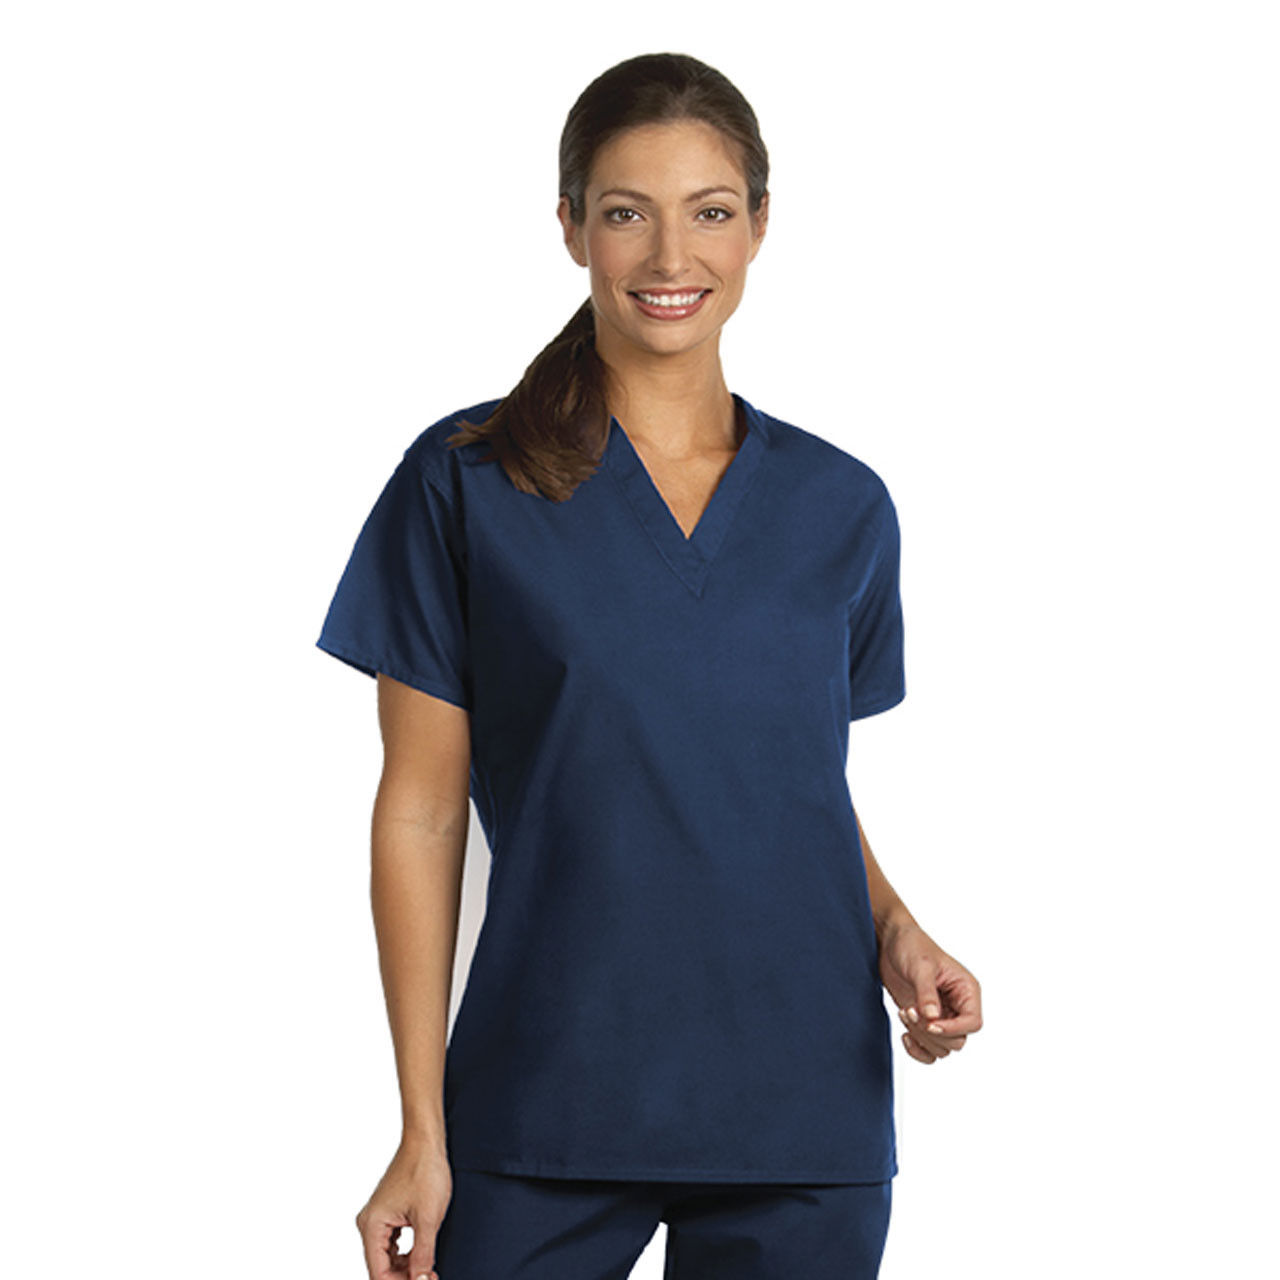 Is the material of the cheap navy blue scrubs comfortable?